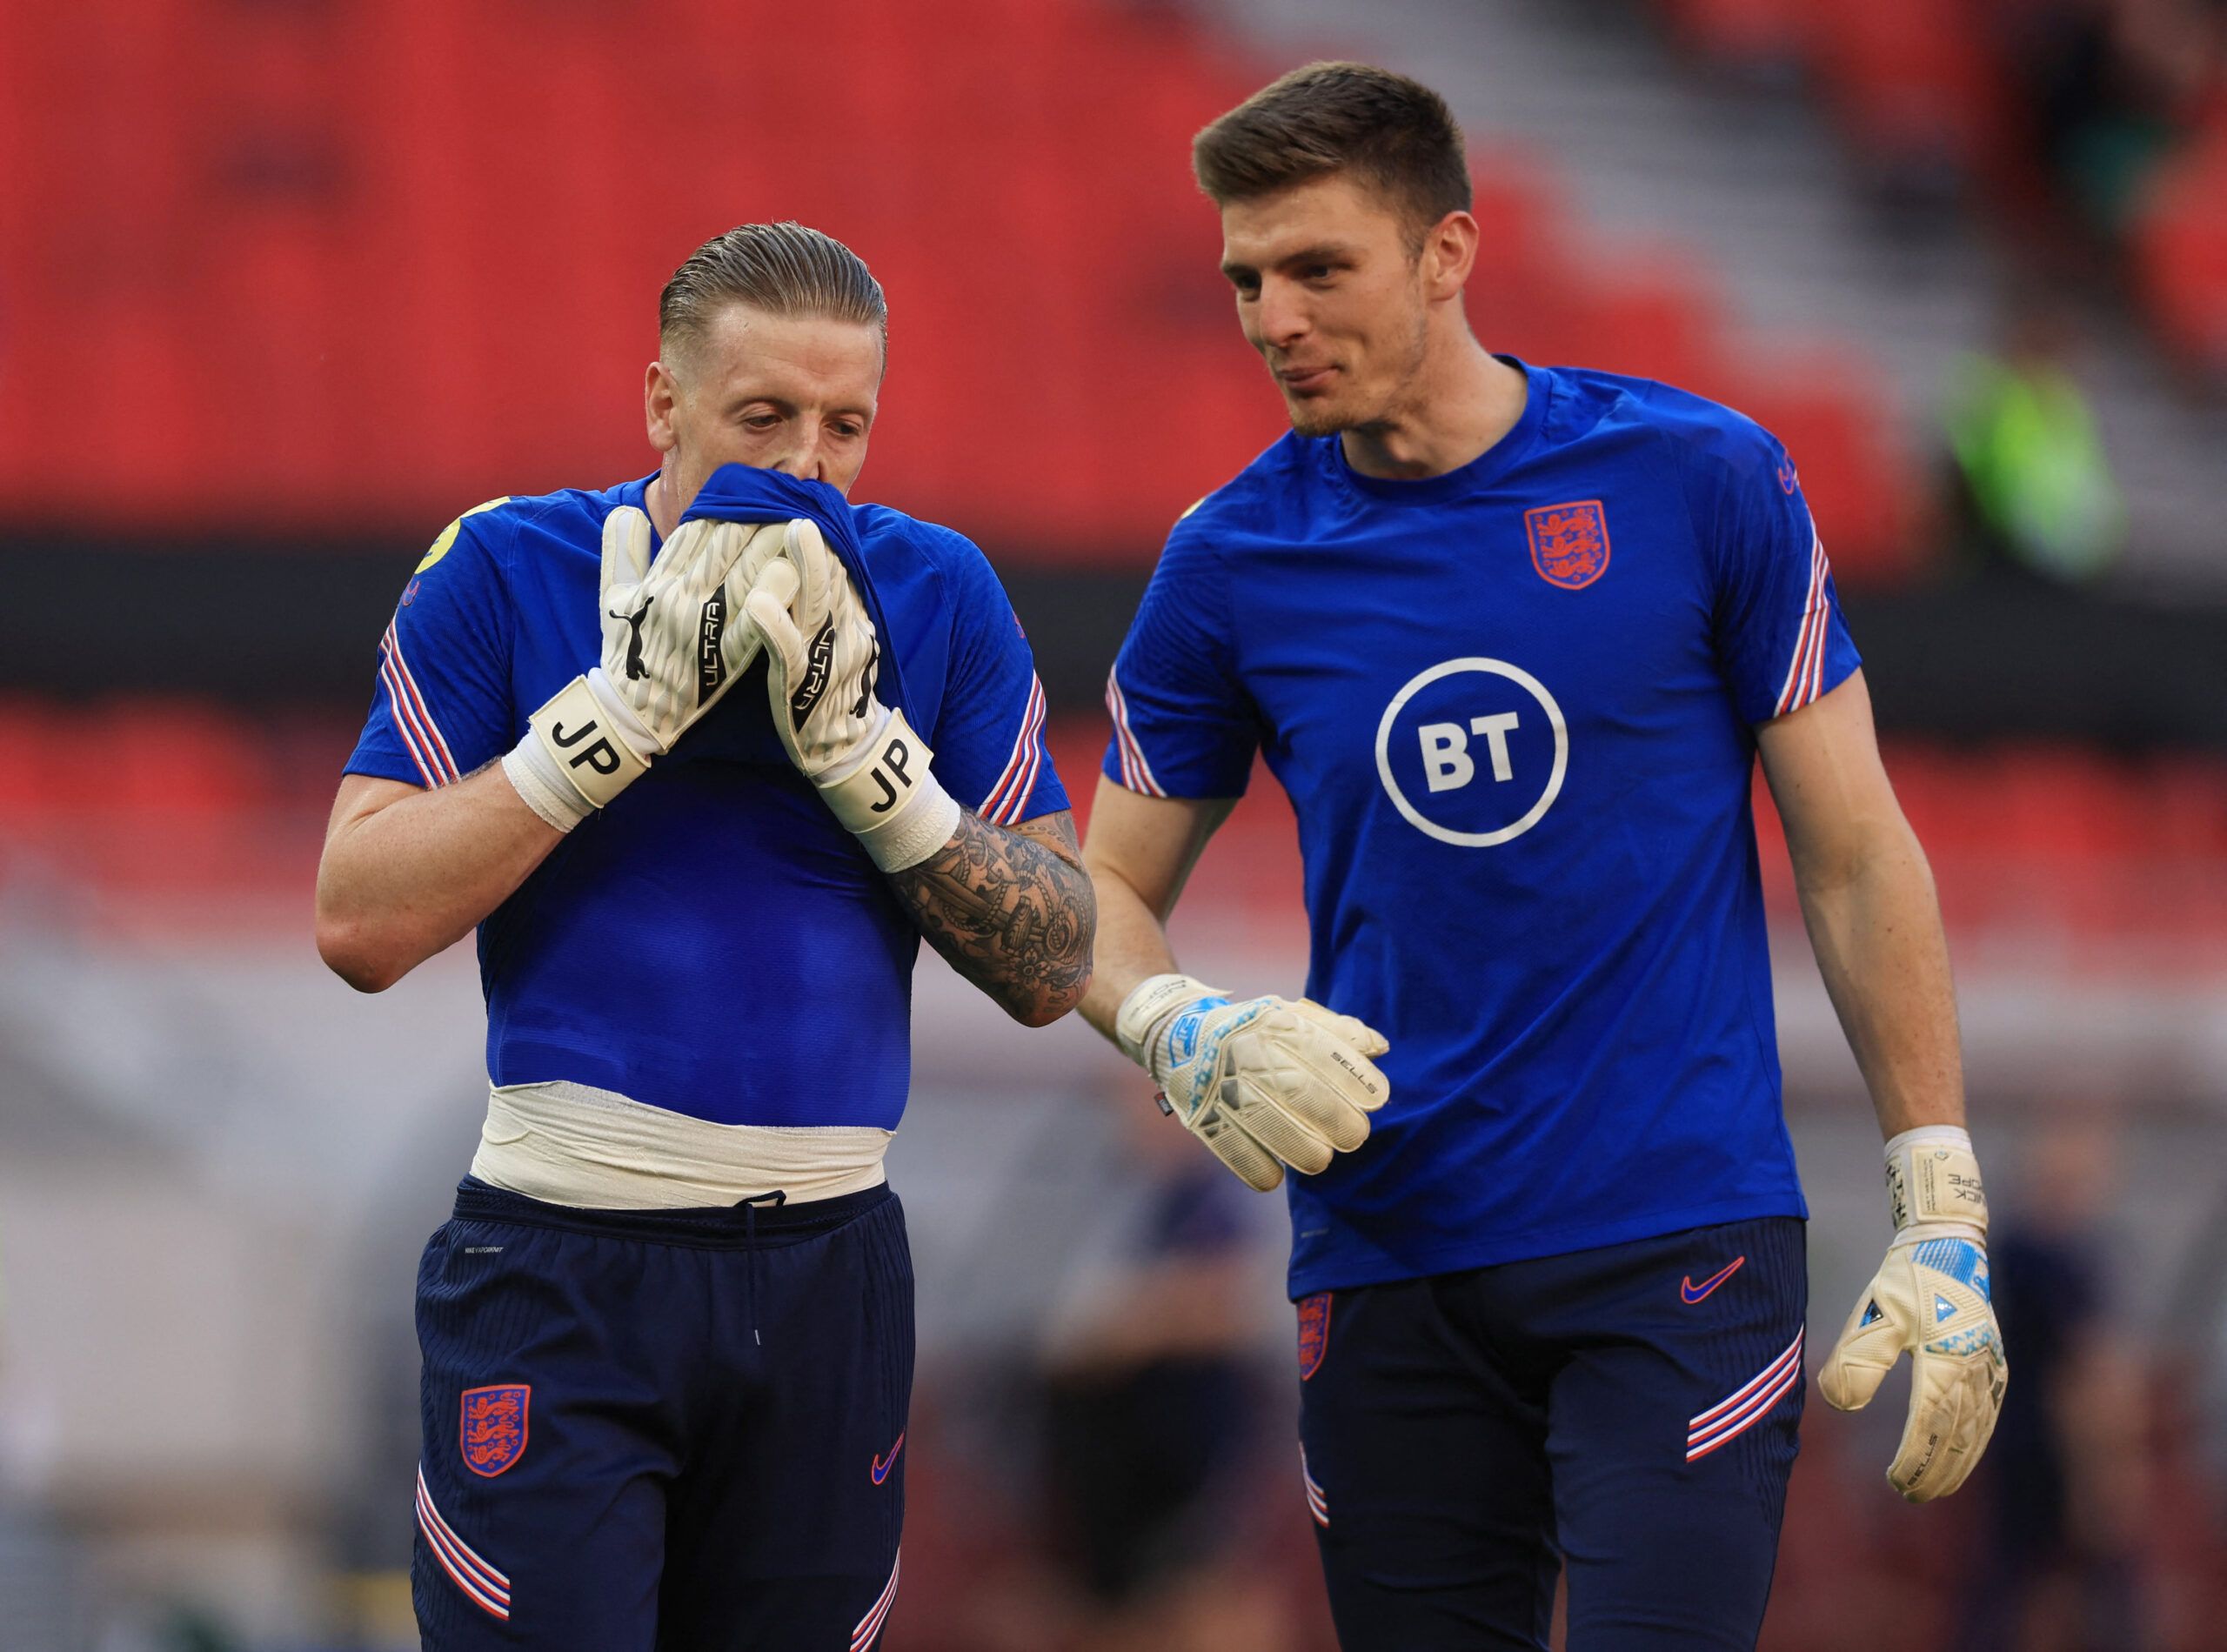 Soccer Football - UEFA Nations League - Group C - Hungary v England - Puskas Arena Park, Budapest, Hungary - June 4, 2022 England's Jordan Pickford and Nick Pope during the warm up before the match Action Images via Reuters/Lee Smith